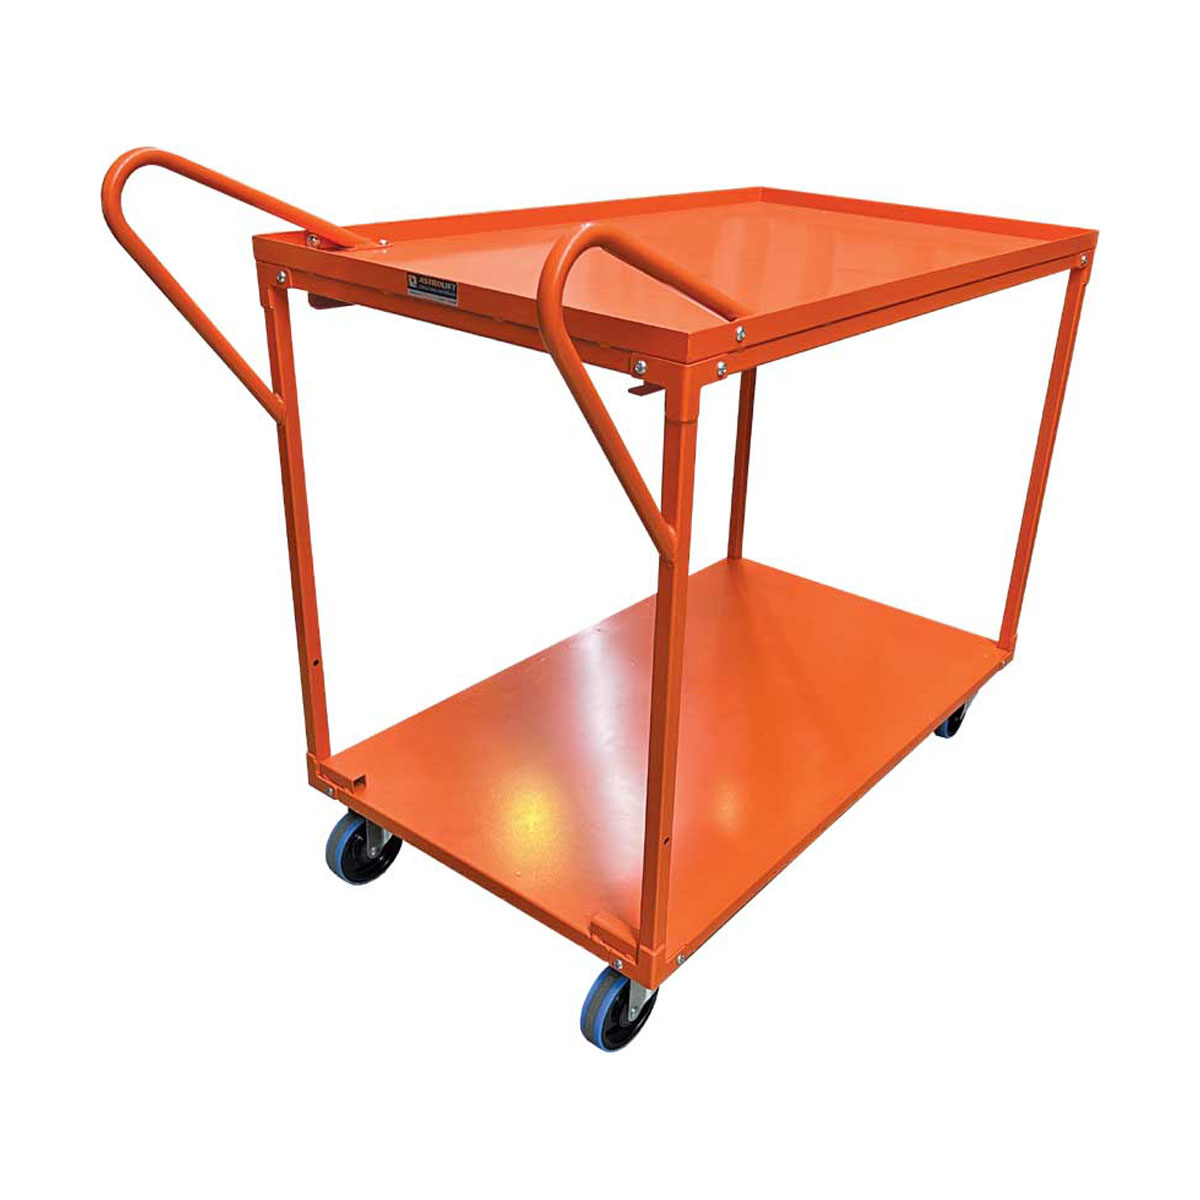 Buy Order-picking Trolley (2 Shelf) available at Astrolift NZ